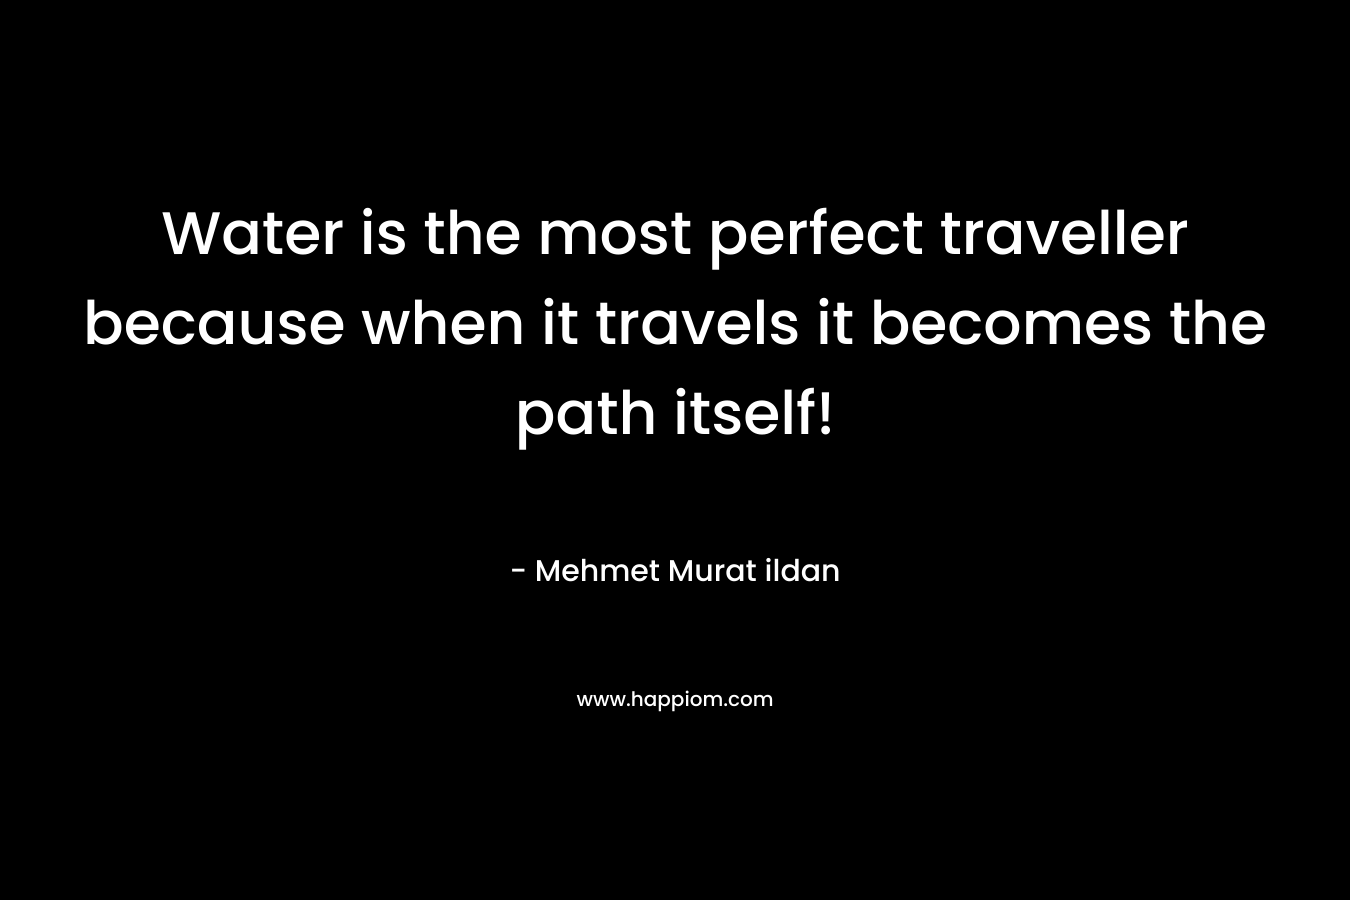 Water is the most perfect traveller because when it travels it becomes the path itself! – Mehmet Murat ildan